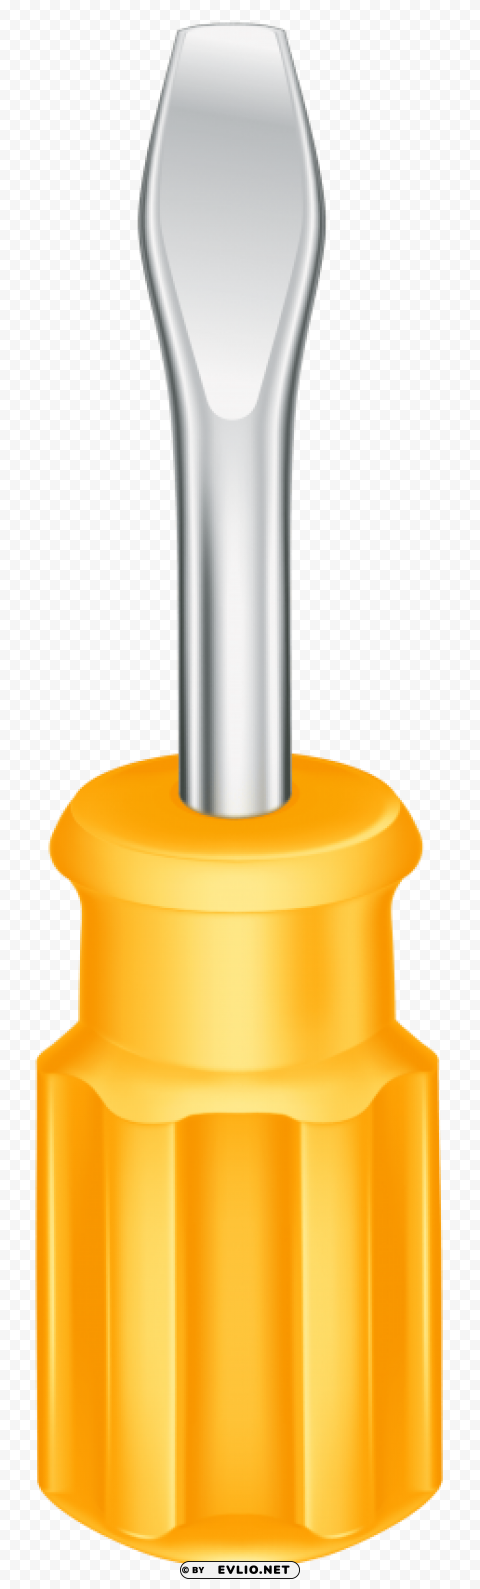 screwdriver Clean Background Isolated PNG Art